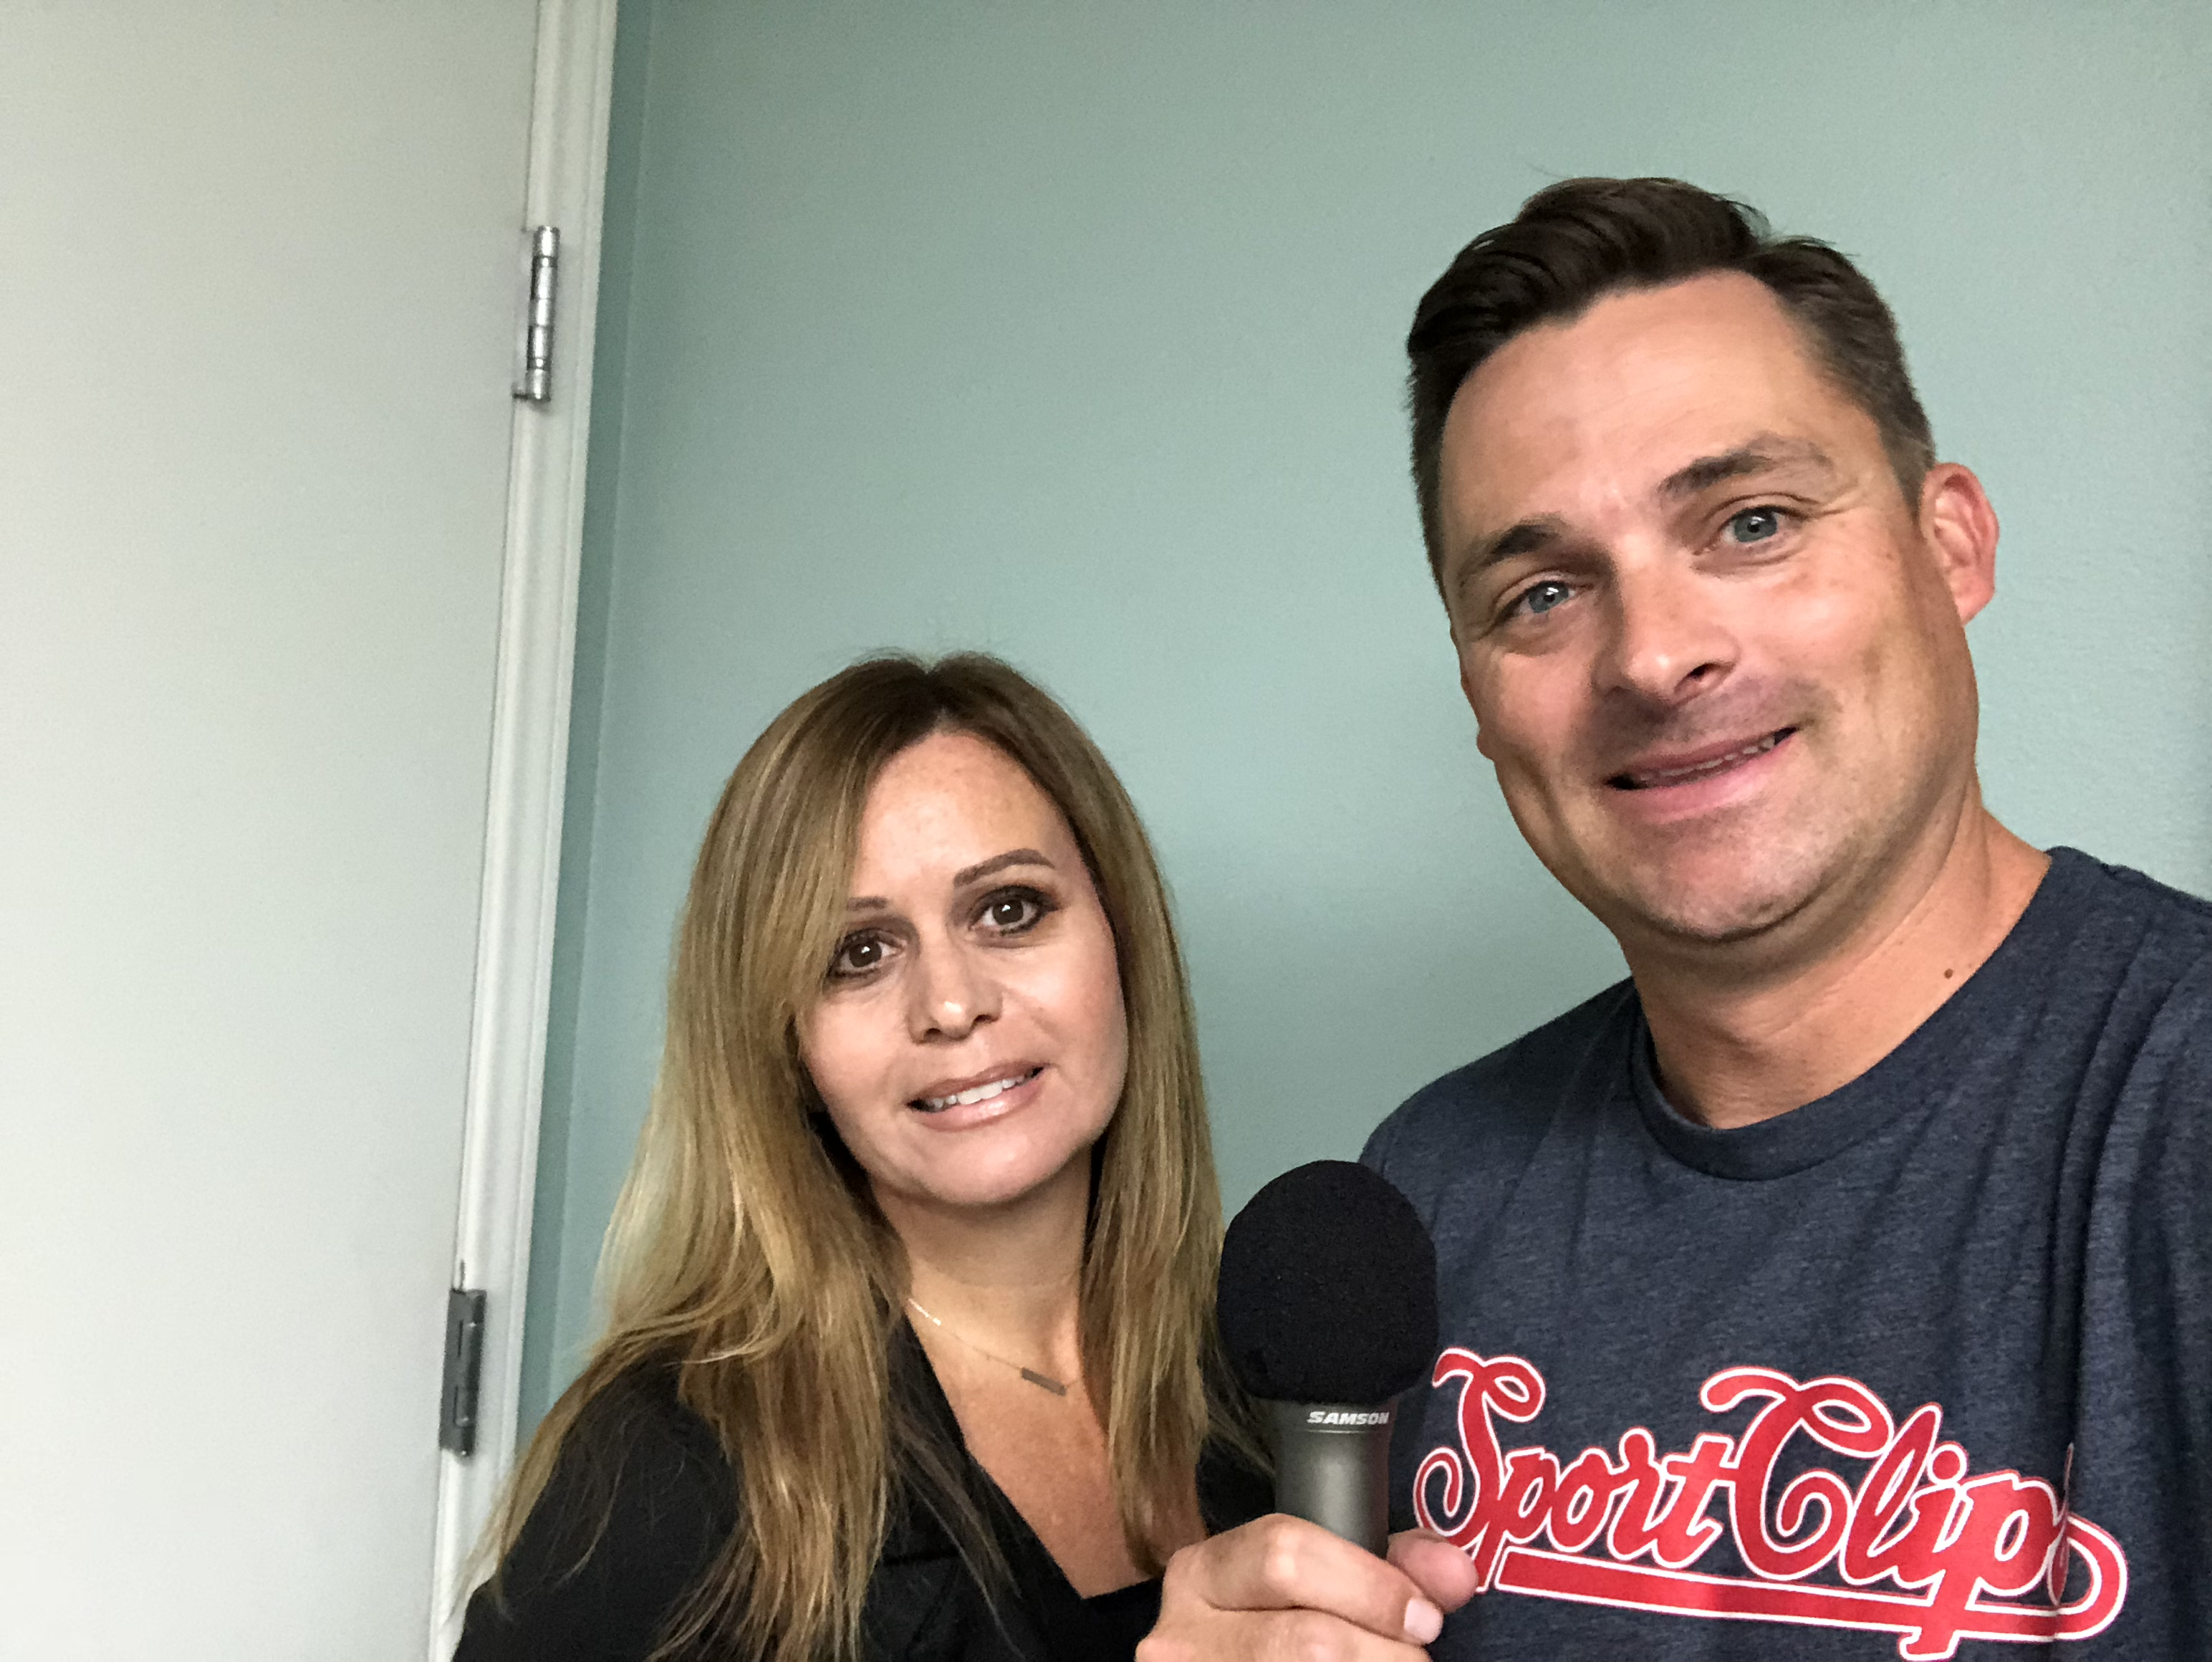 Jennifer Justis and Chad Jordan holding a microphone